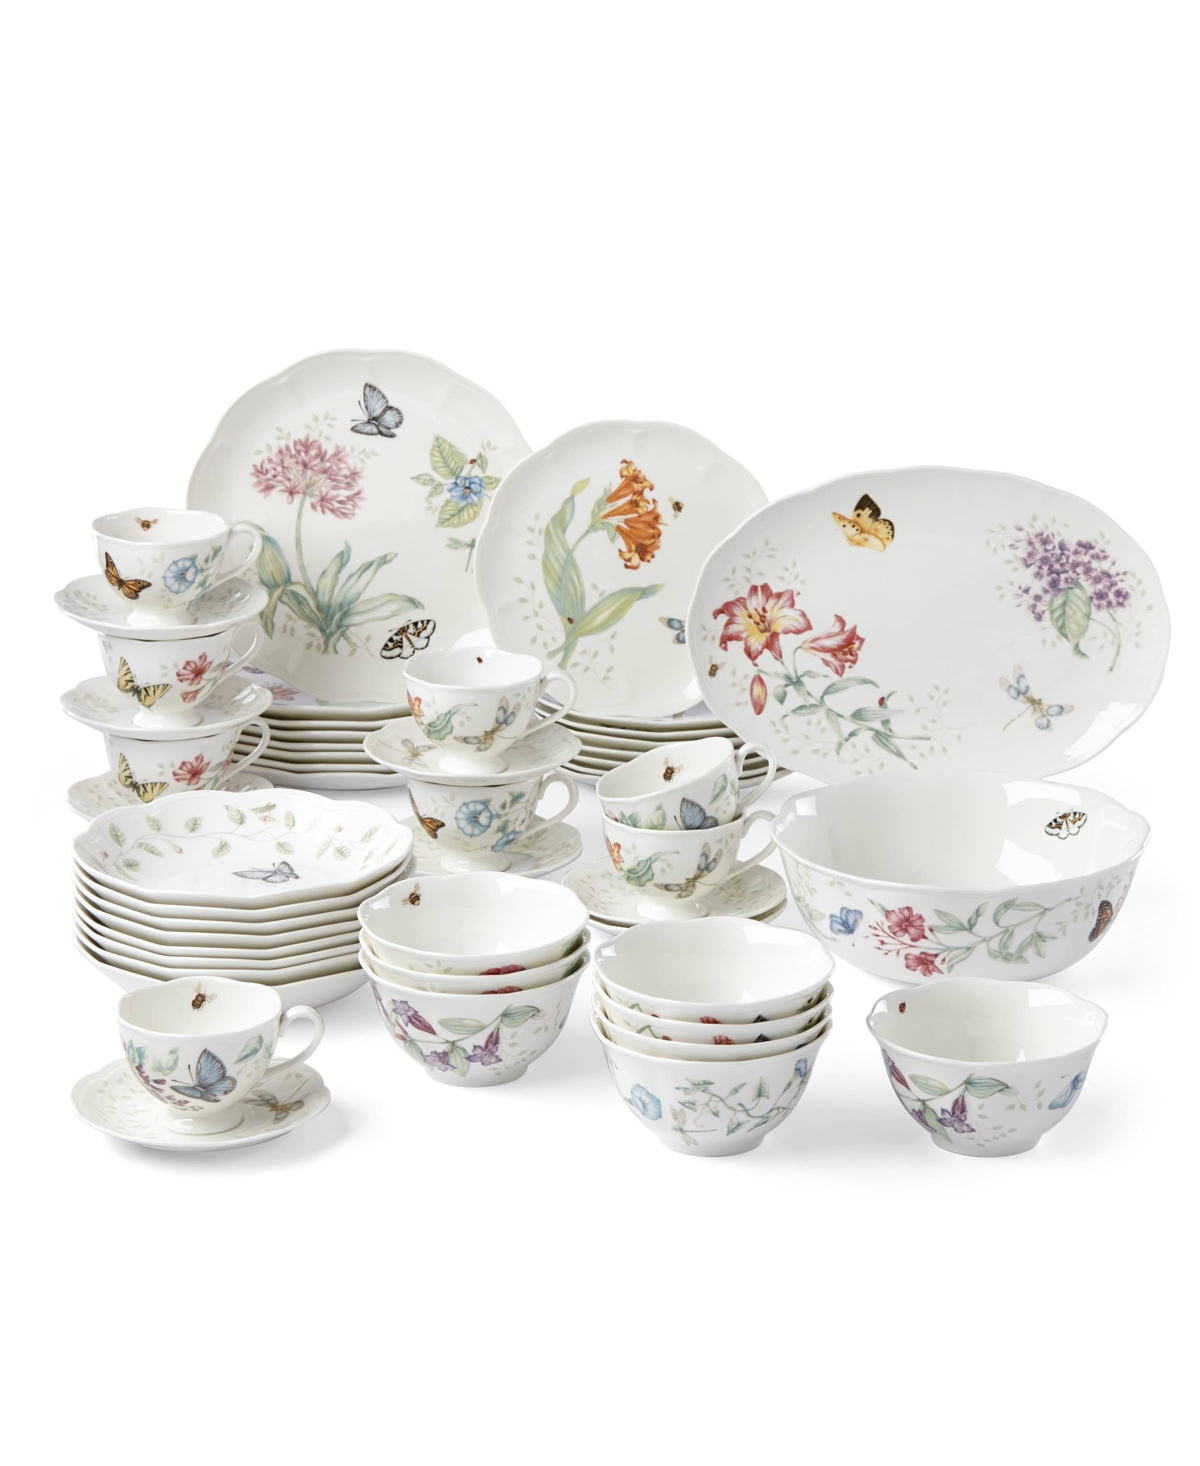 Butterfly Meadow 50 Pc. Dinnerware Set, Service for 8, Created for Macy's - White Body W/multicolor Floral and Botan